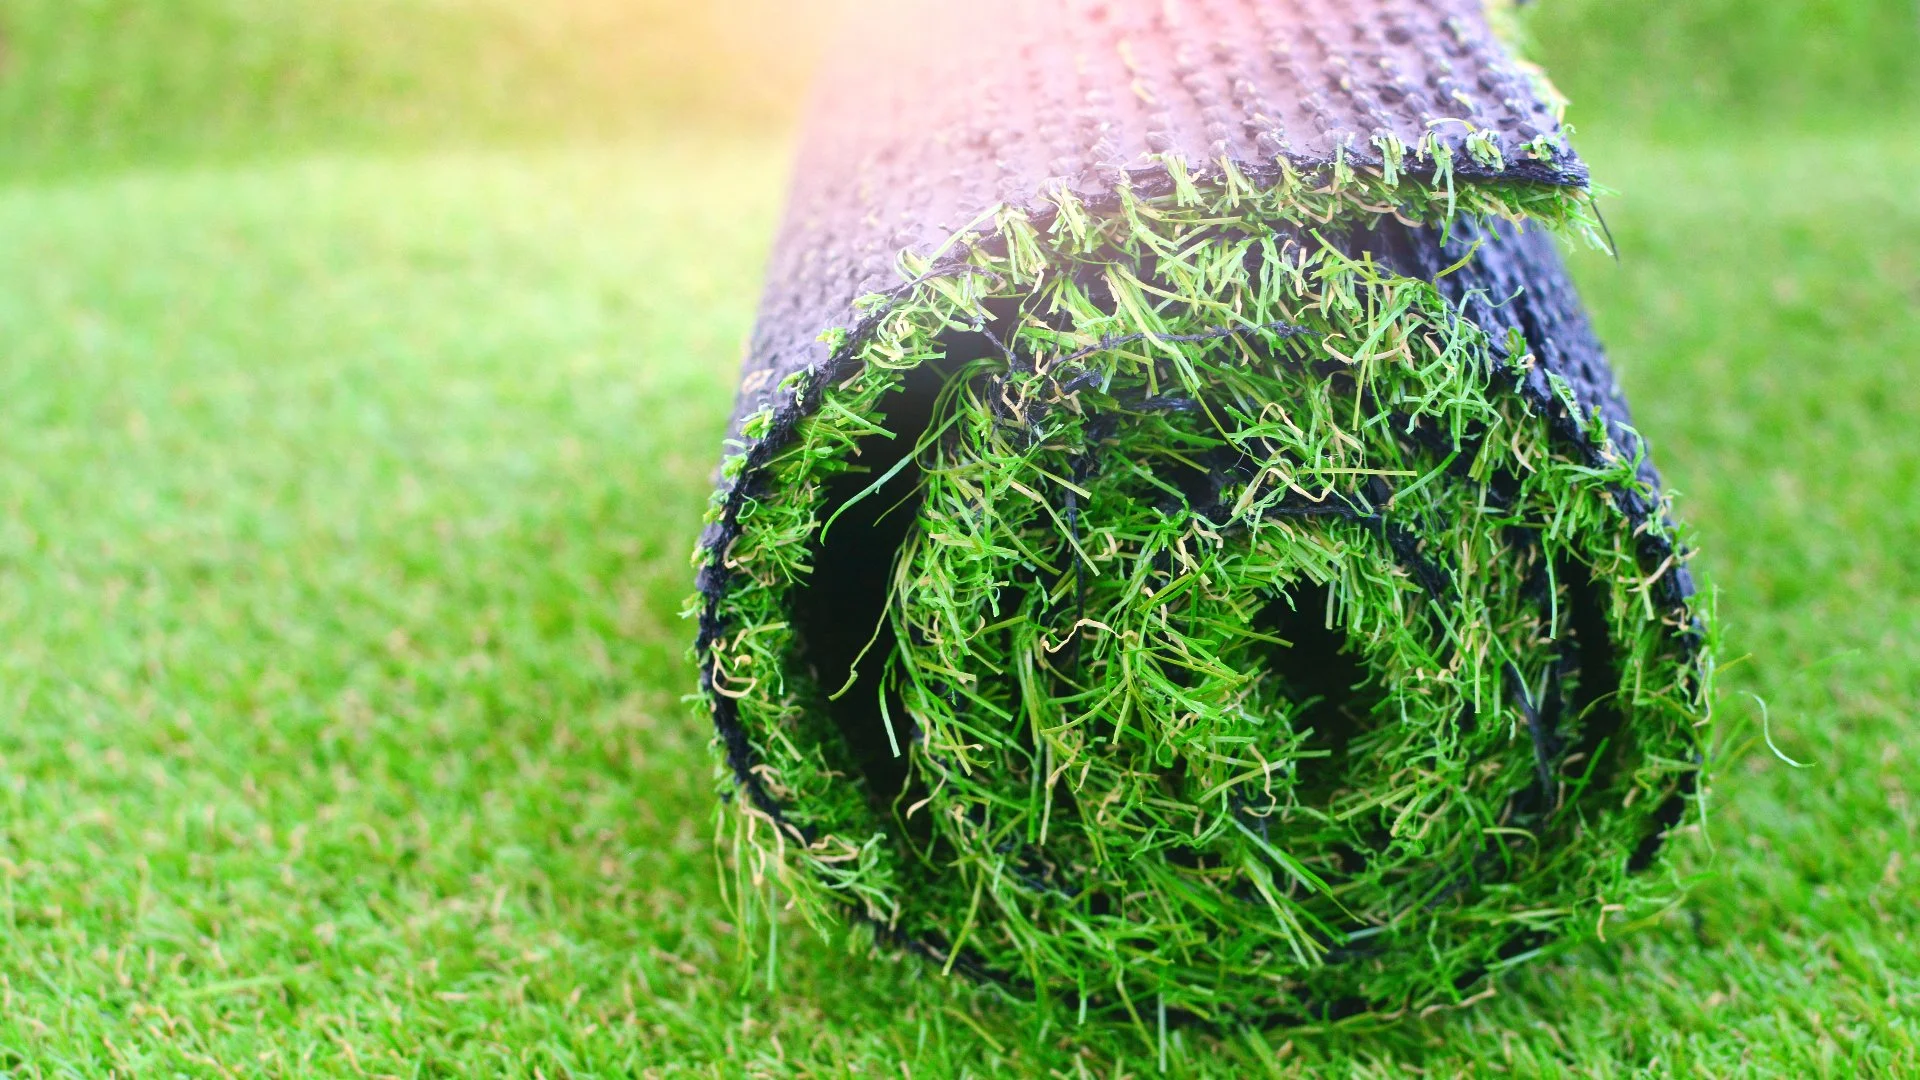 Sod or Artificial Turf - Which Option Is Better for You?